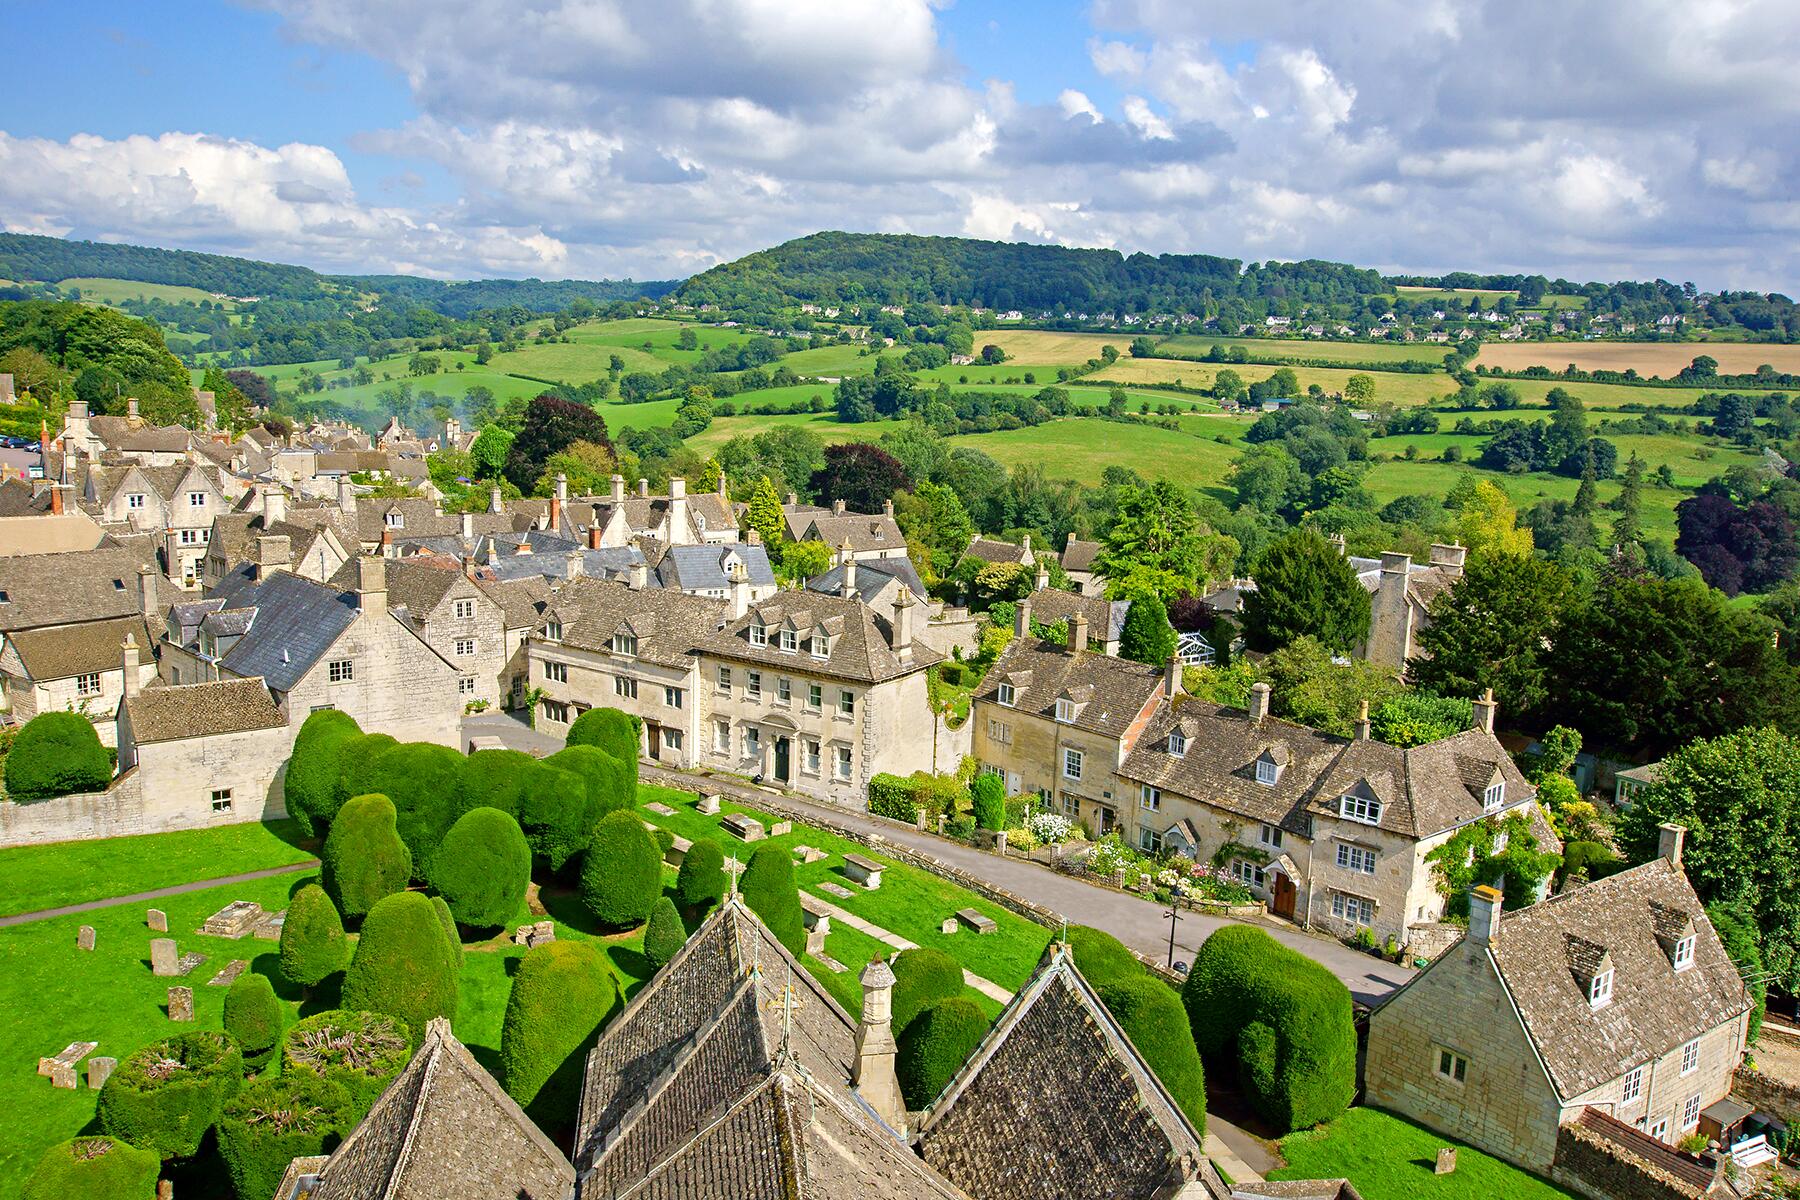 <a href='https://www.fodors.com/world/europe/england/experiences/news/photos/15-of-the-most-picturesque-small-towns-in-england#'>From &quot;The 21 Best Small Towns in England: Painswick&quot;</a>